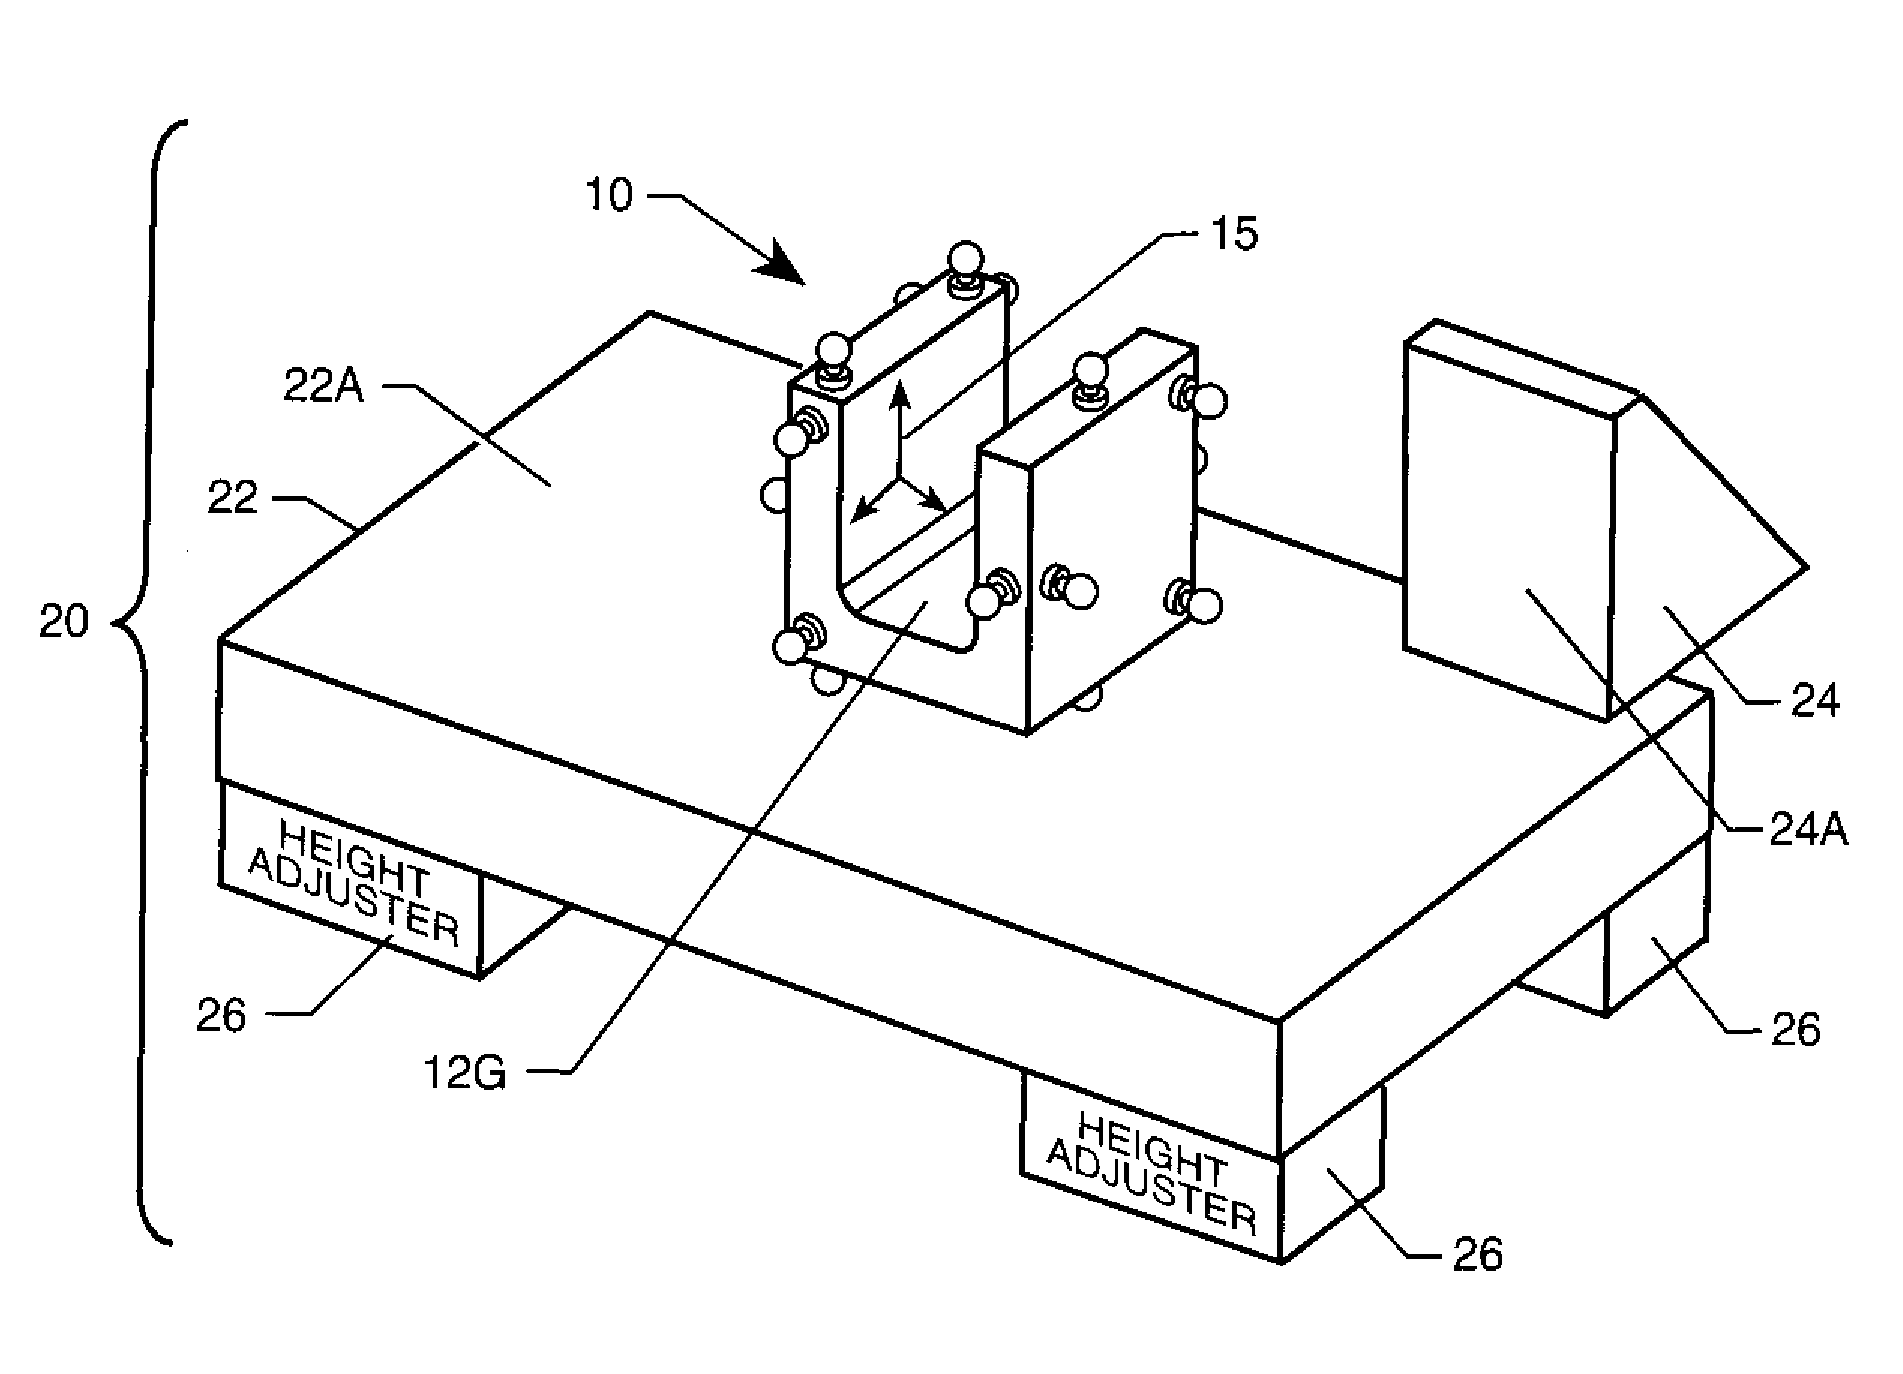 Positioning system for single or multi-axis sensitive instrument calibration and calibration system for use therewith